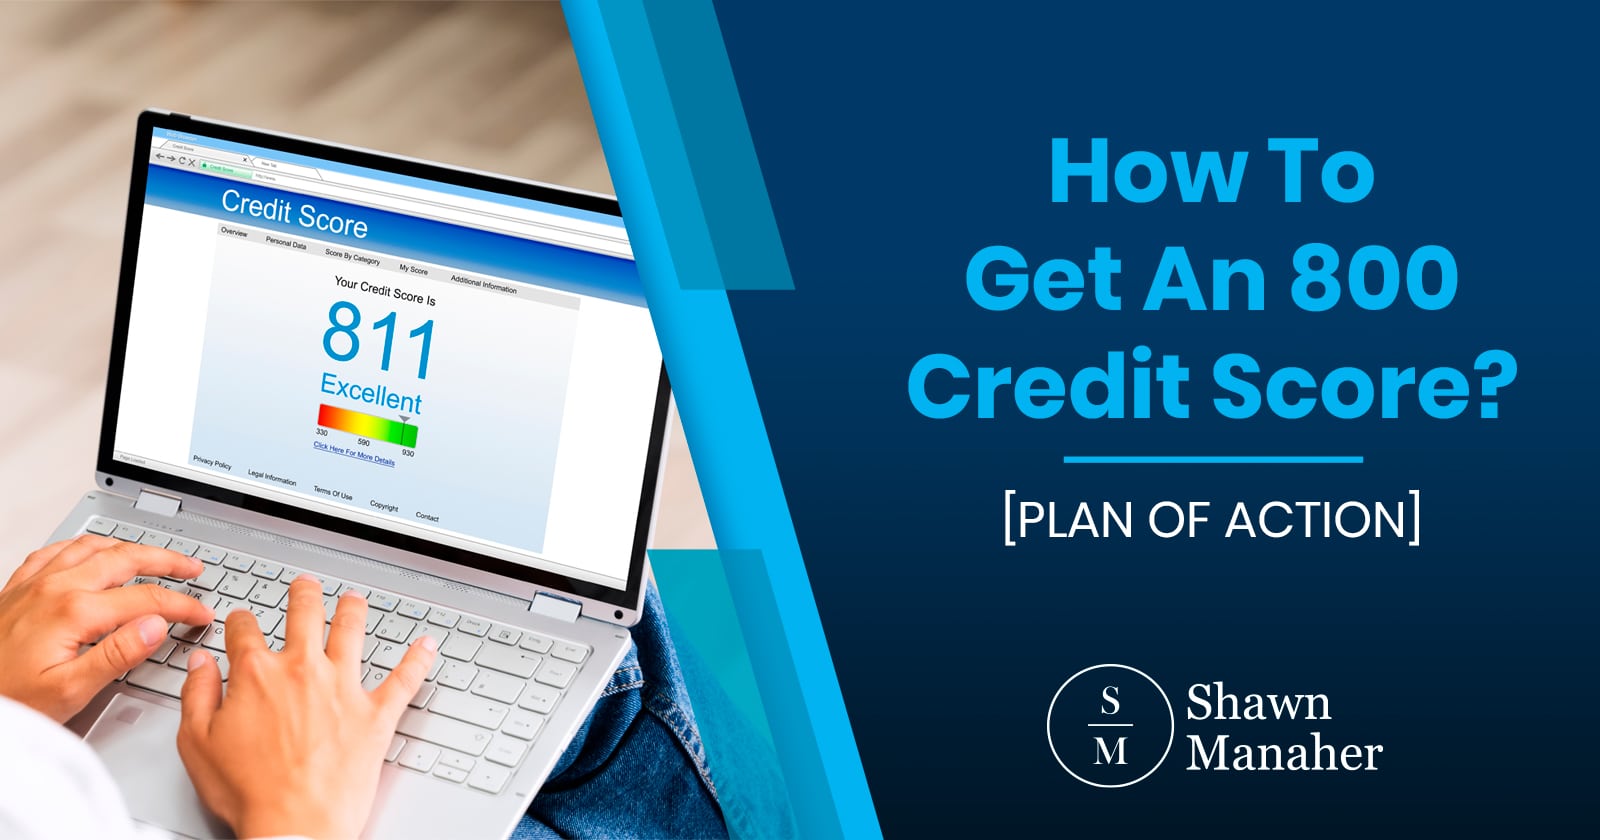 How To Get An 800 Credit Score? [PLAN OF ACTION]